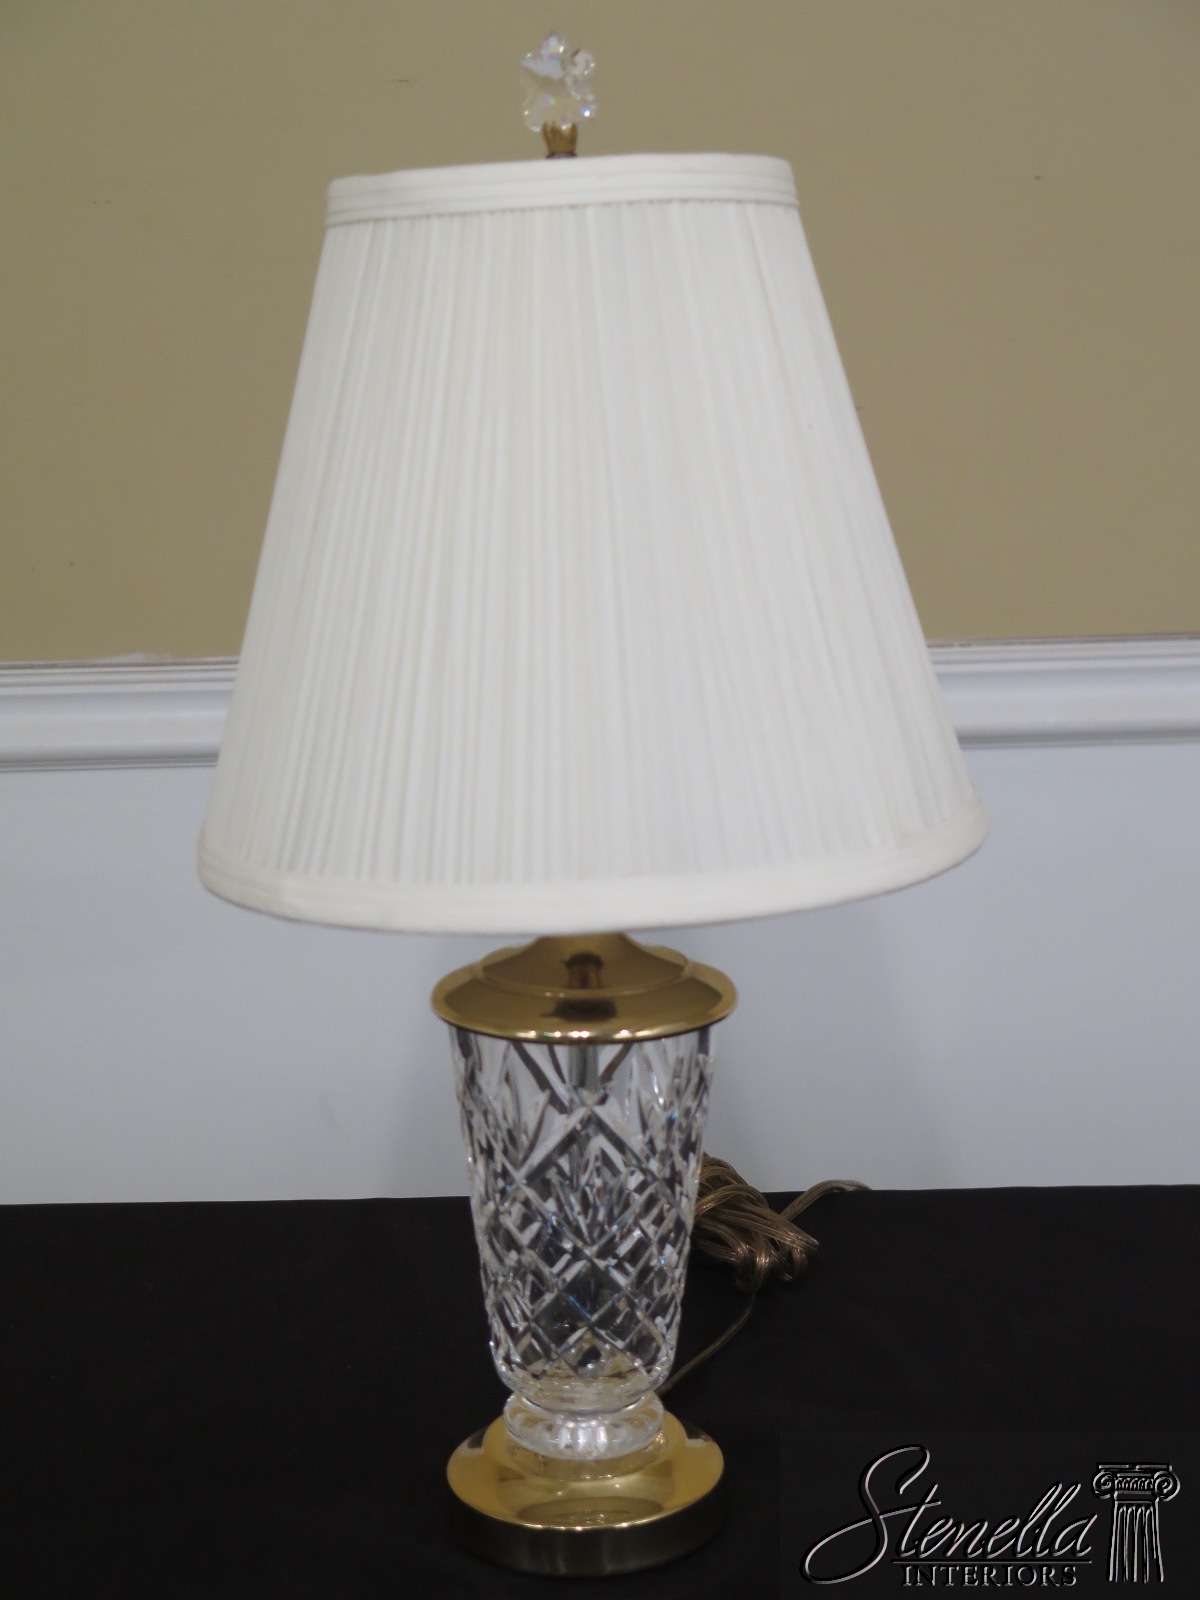 LF47161EC: Small WATERFORD Crystal Table Lamp w. Shade | eBay